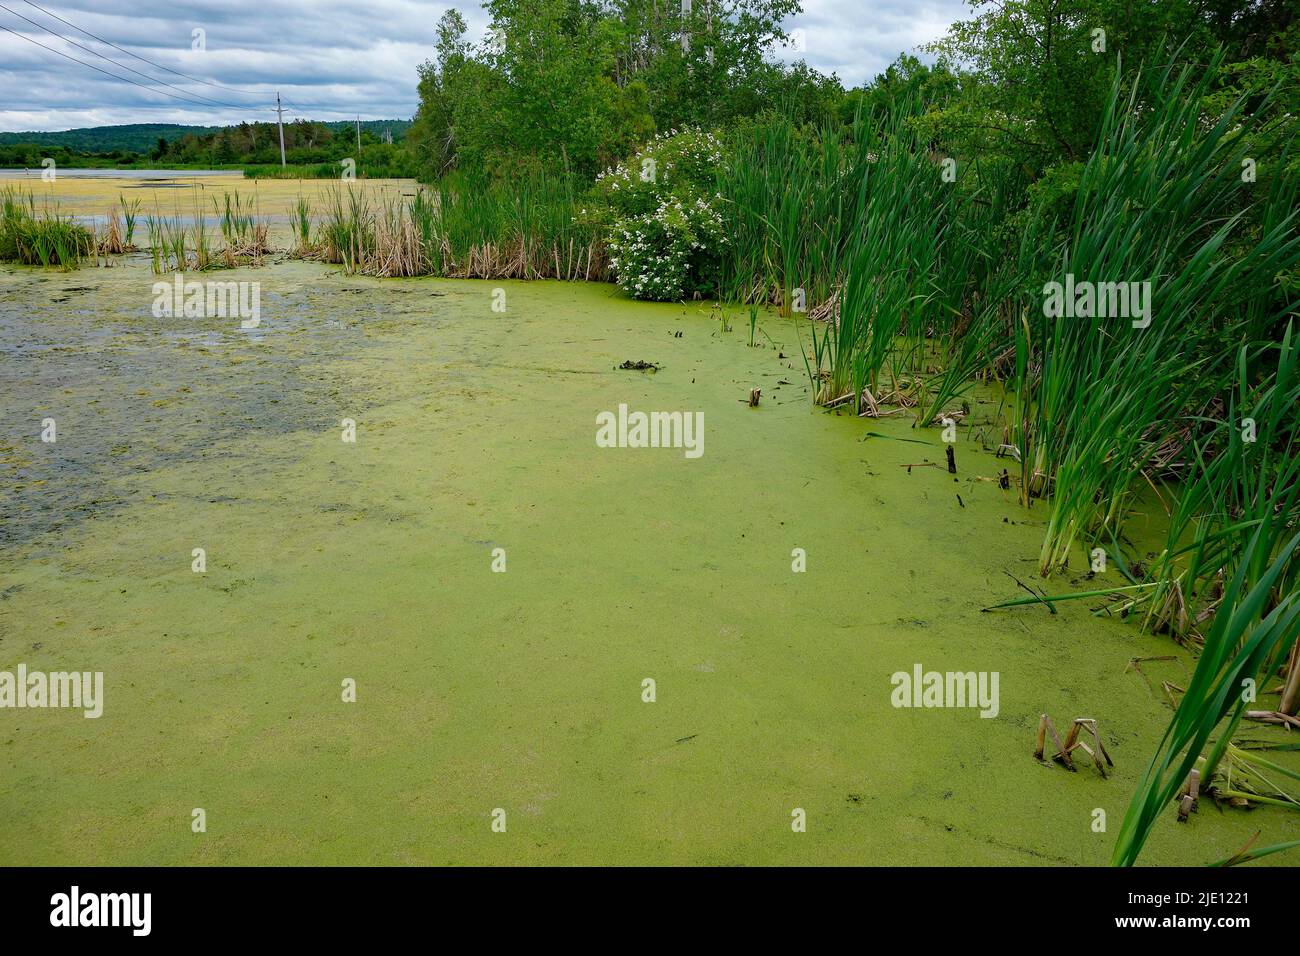 duckweed on a pond Stock Photo